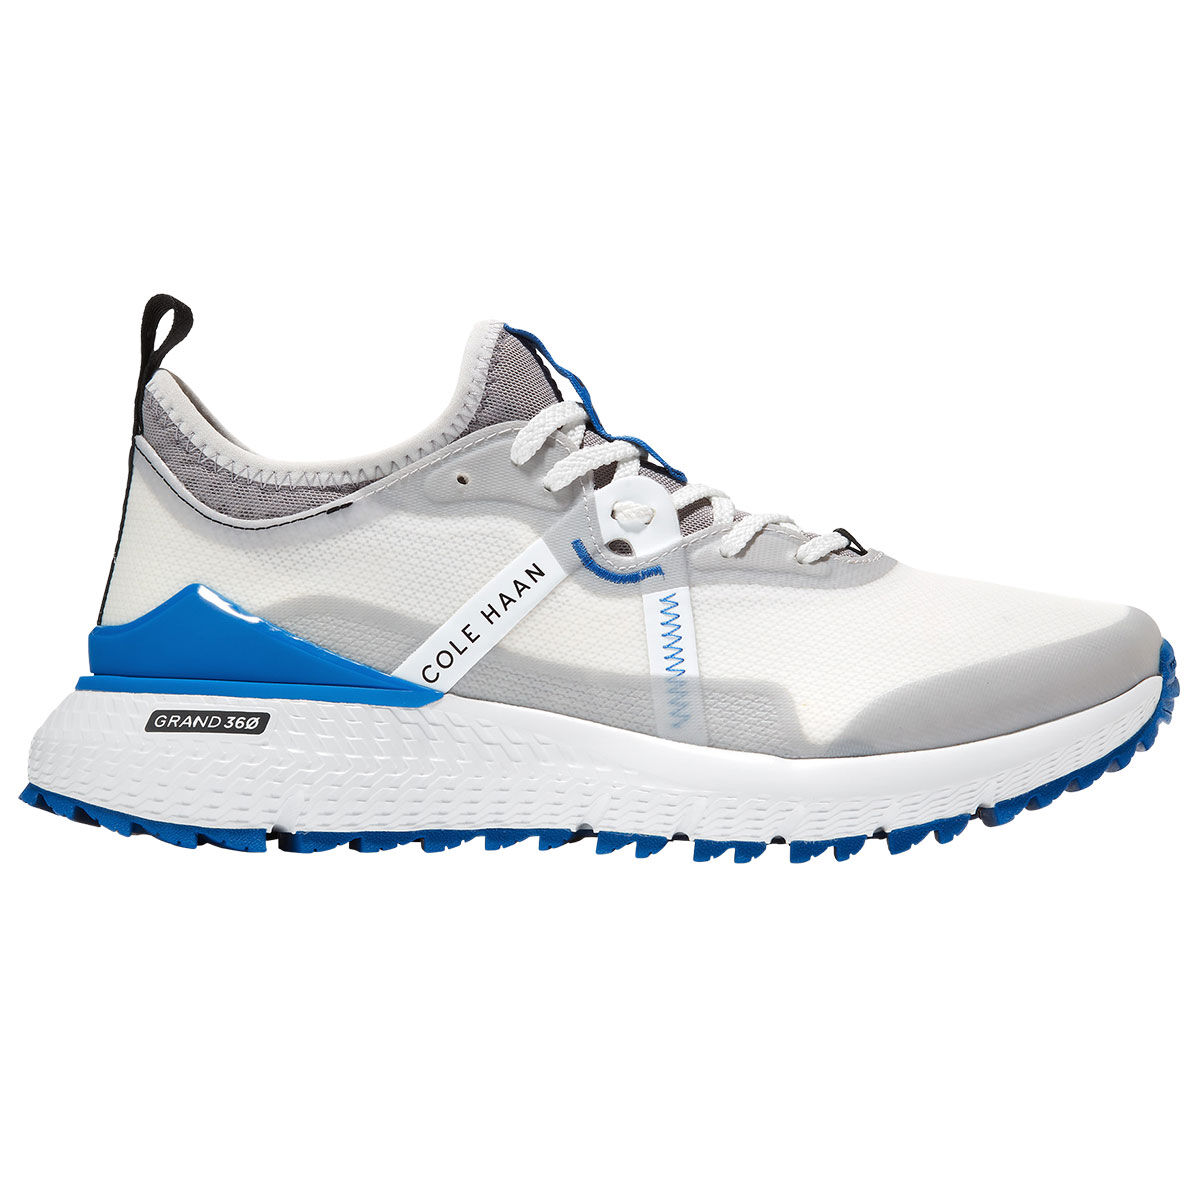 Cole Haan Men’s ZEROGRAND Overtake Spikeless Golf Shoes, Mens, Microchip/lapis blue/white, 8 | American Golf